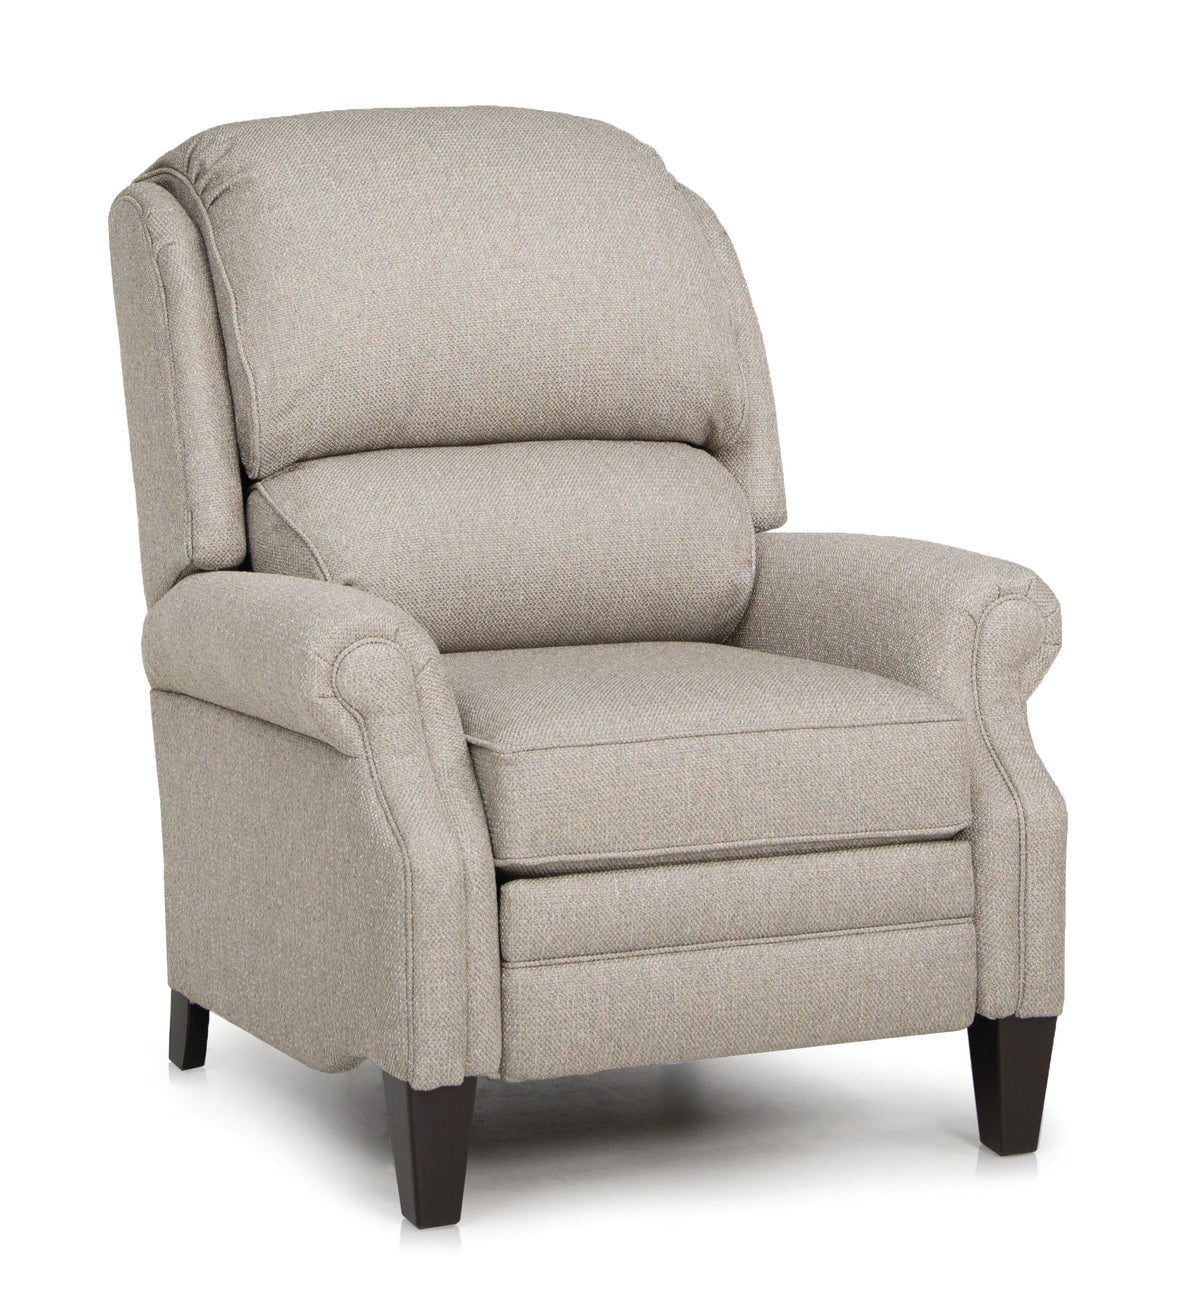 710 Style Motorized Reclining Chair